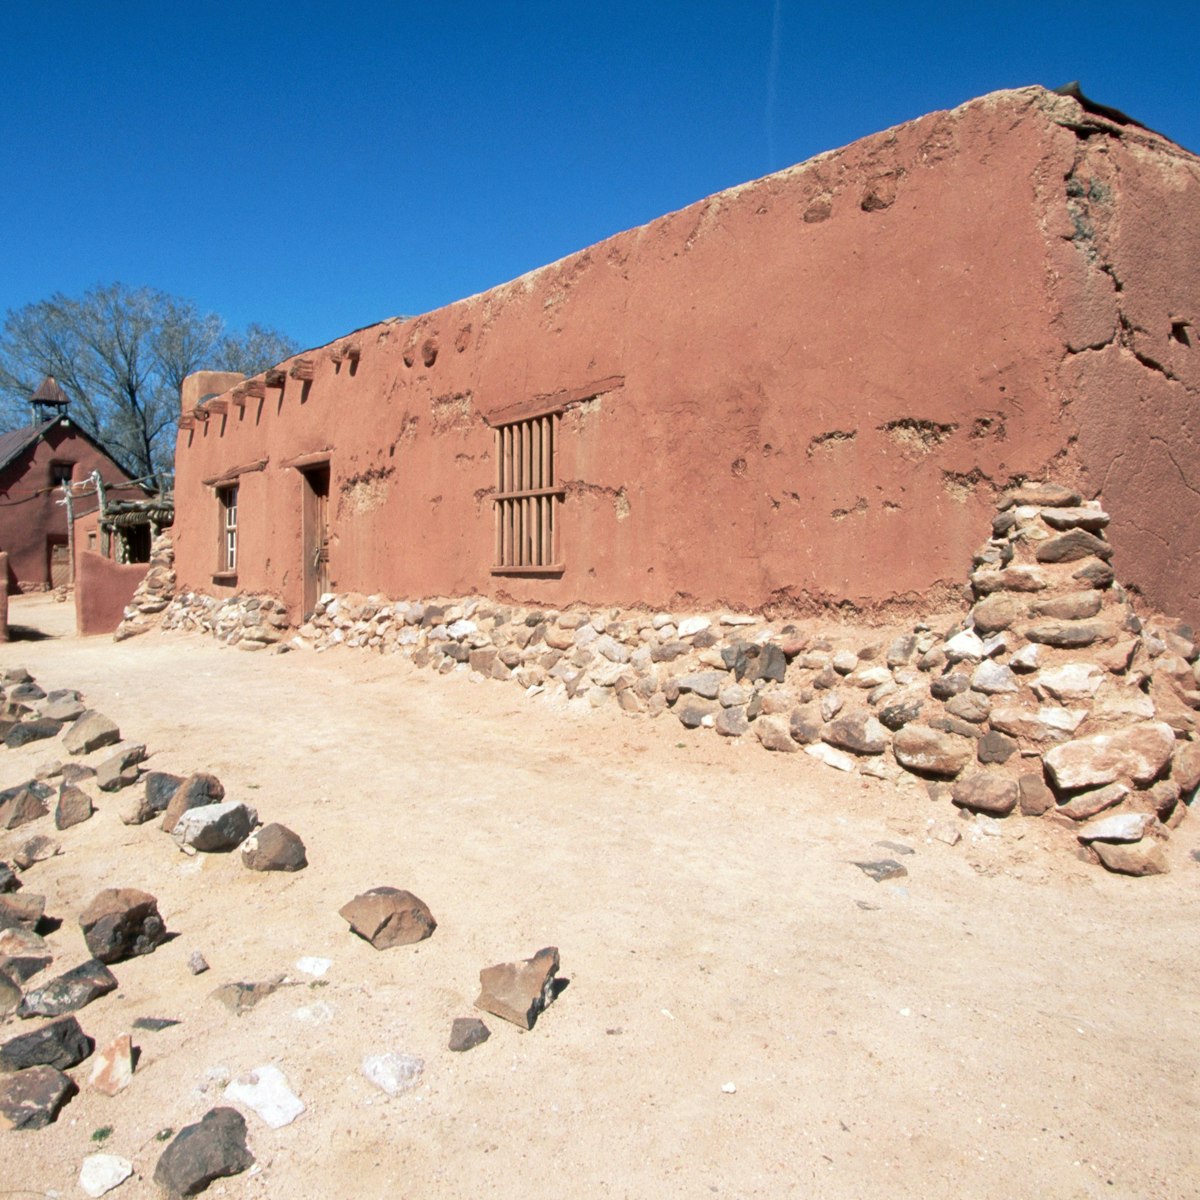 This historic rancho, now a living history museum, dates from the early 1700s and was an important paraje or stopping point along the famous Camino Real, the Royal Road from Mexico City to Santa Fe, New Mexico. | Location: near Santa Fe, New Mexico, USA.